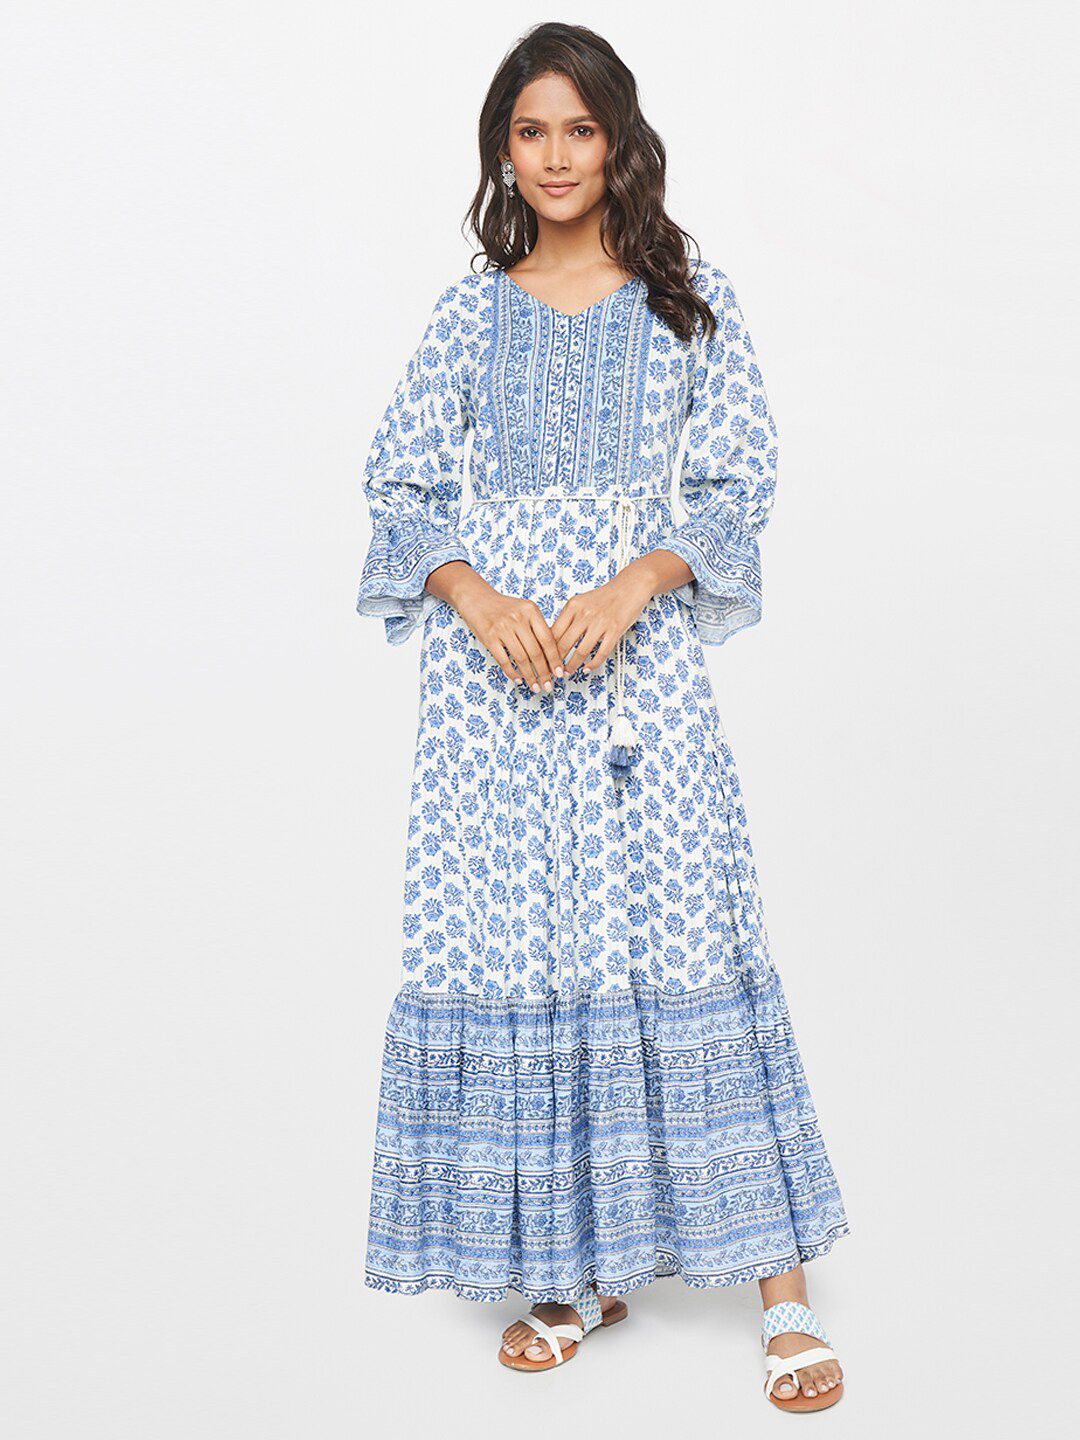 itse Blue Floral Midi Dress Price in India